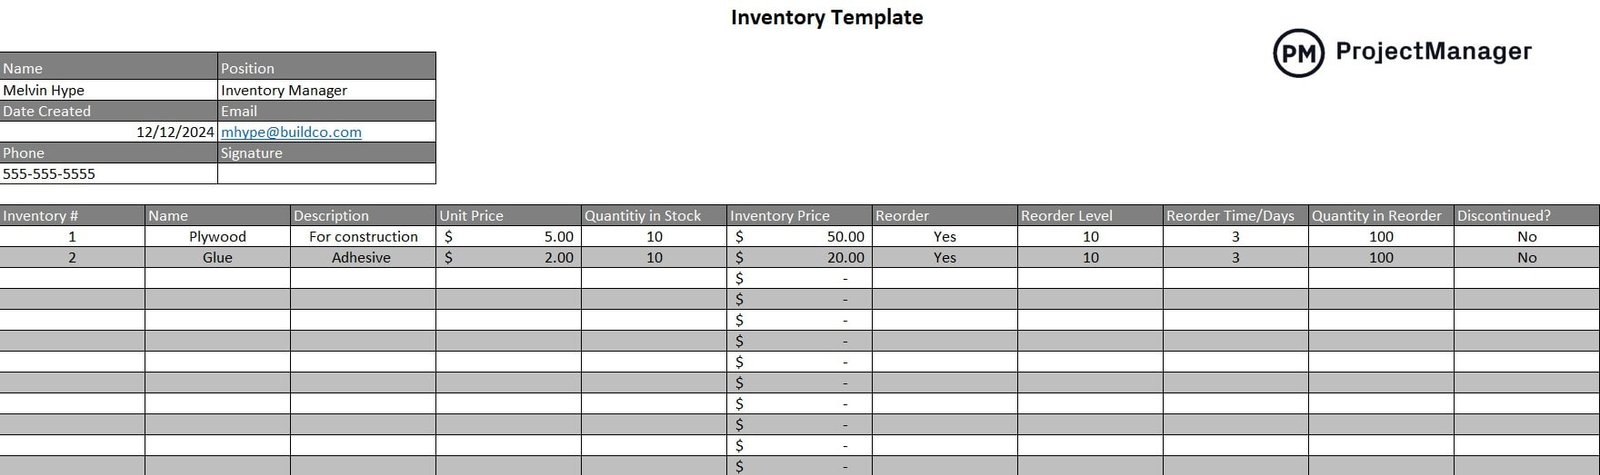 Inventory Management Templates